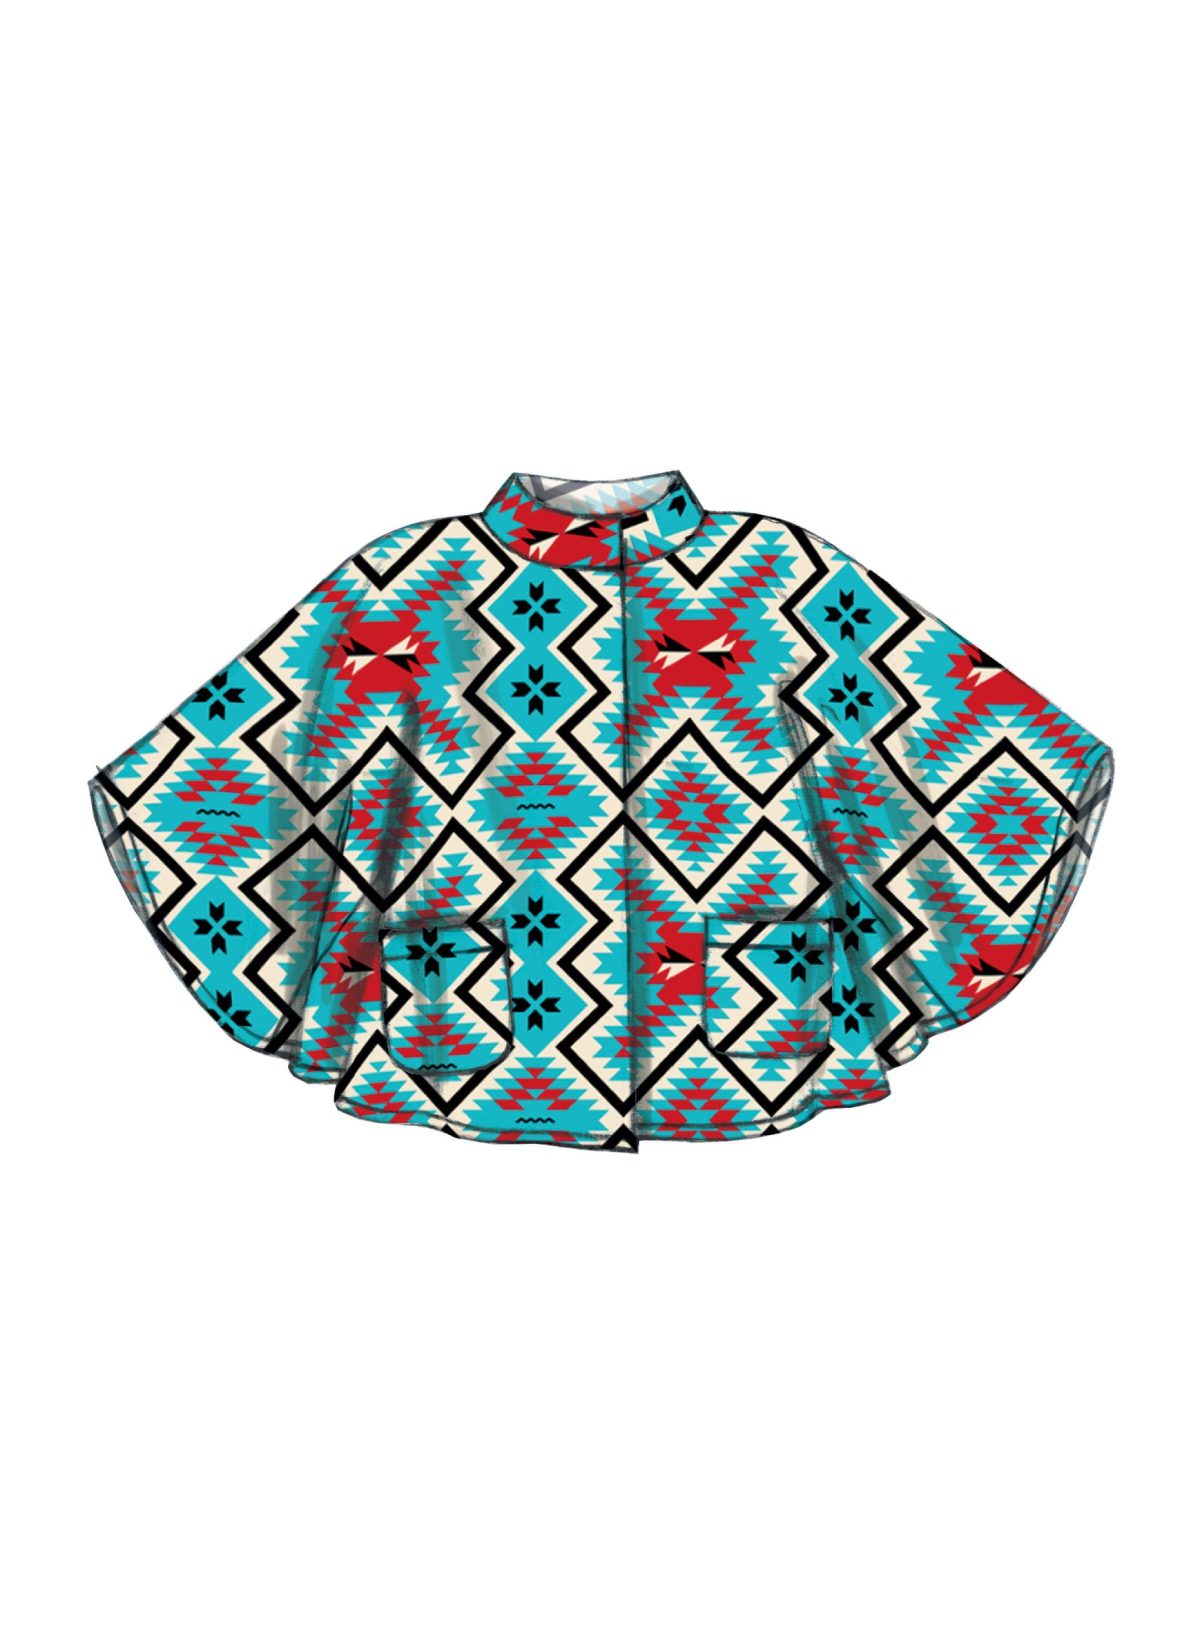 McCall's Sewing Pattern M7202 Misses' Ponchos